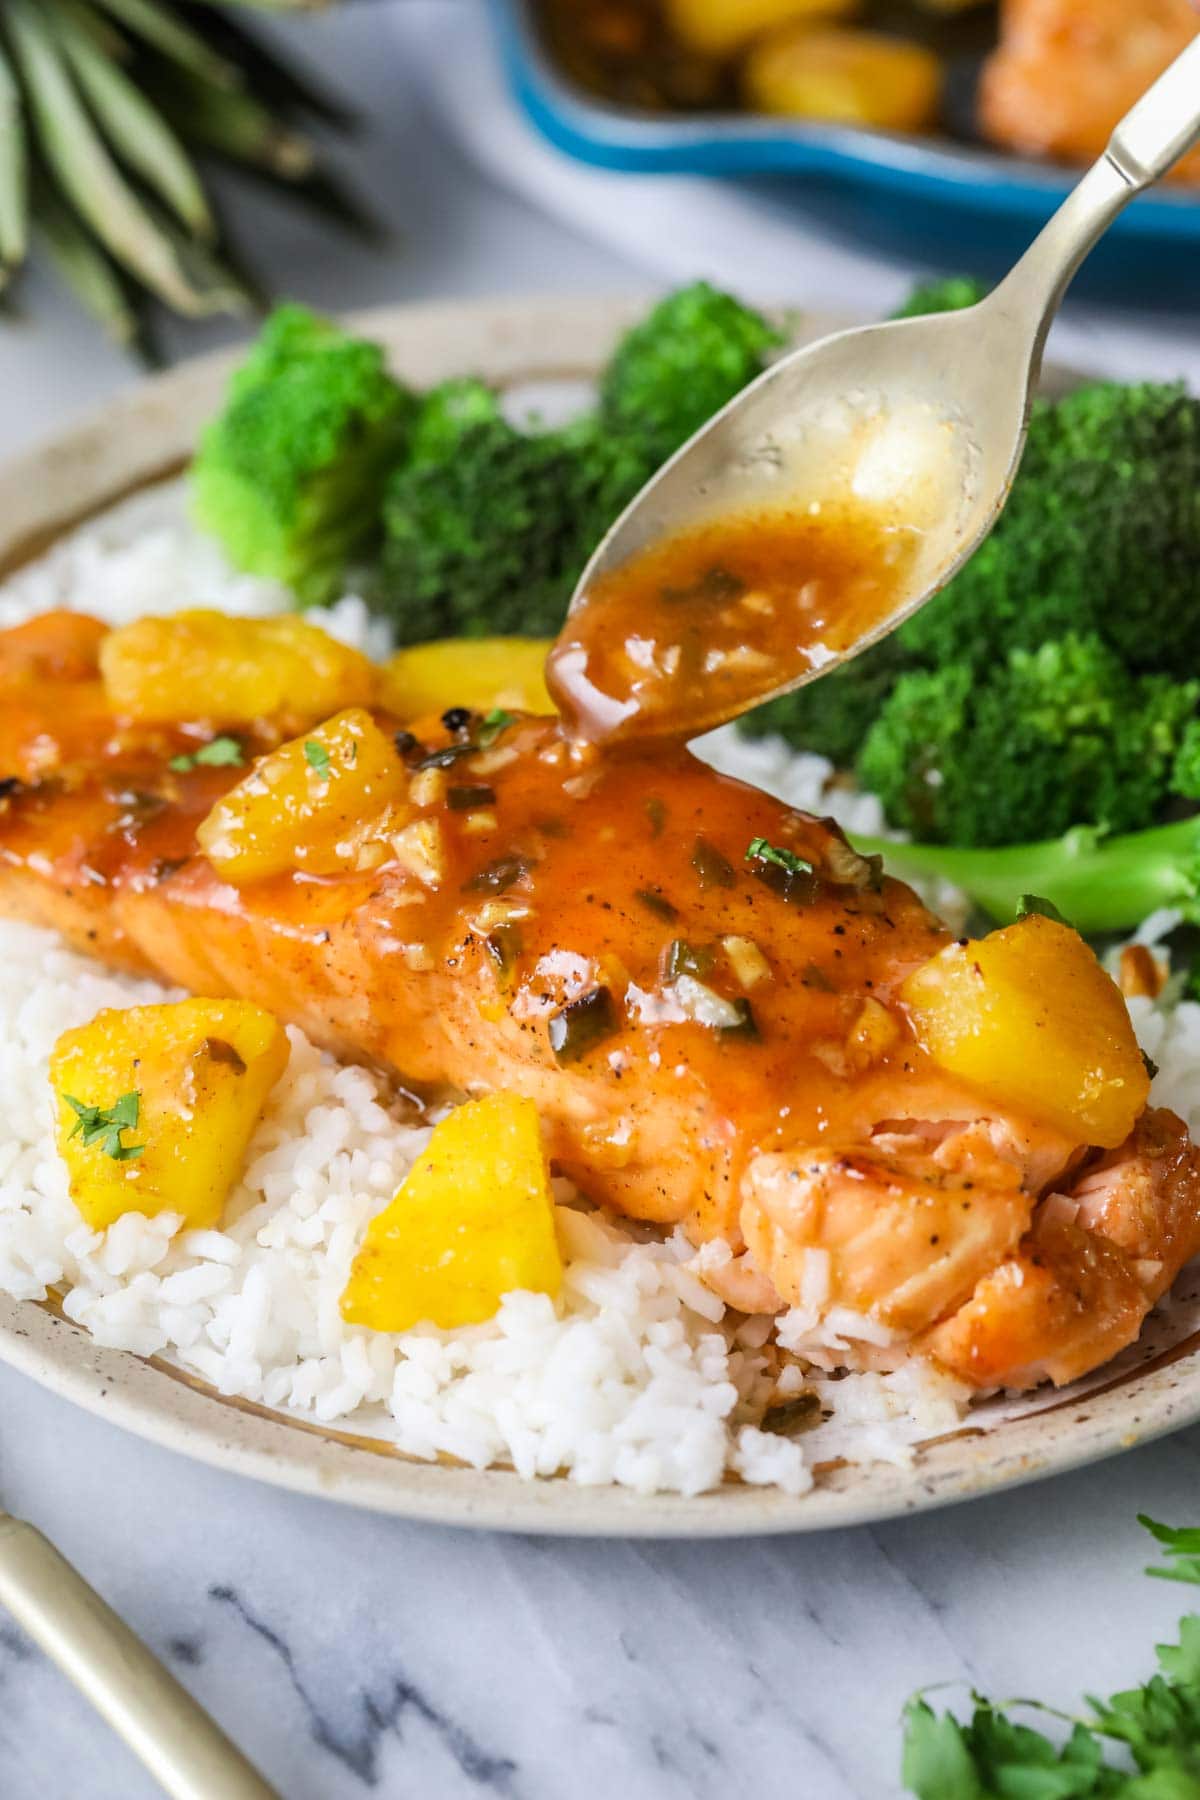 Sauce being poured over a piece of salmon topped with pineapple on a bed of white rice.